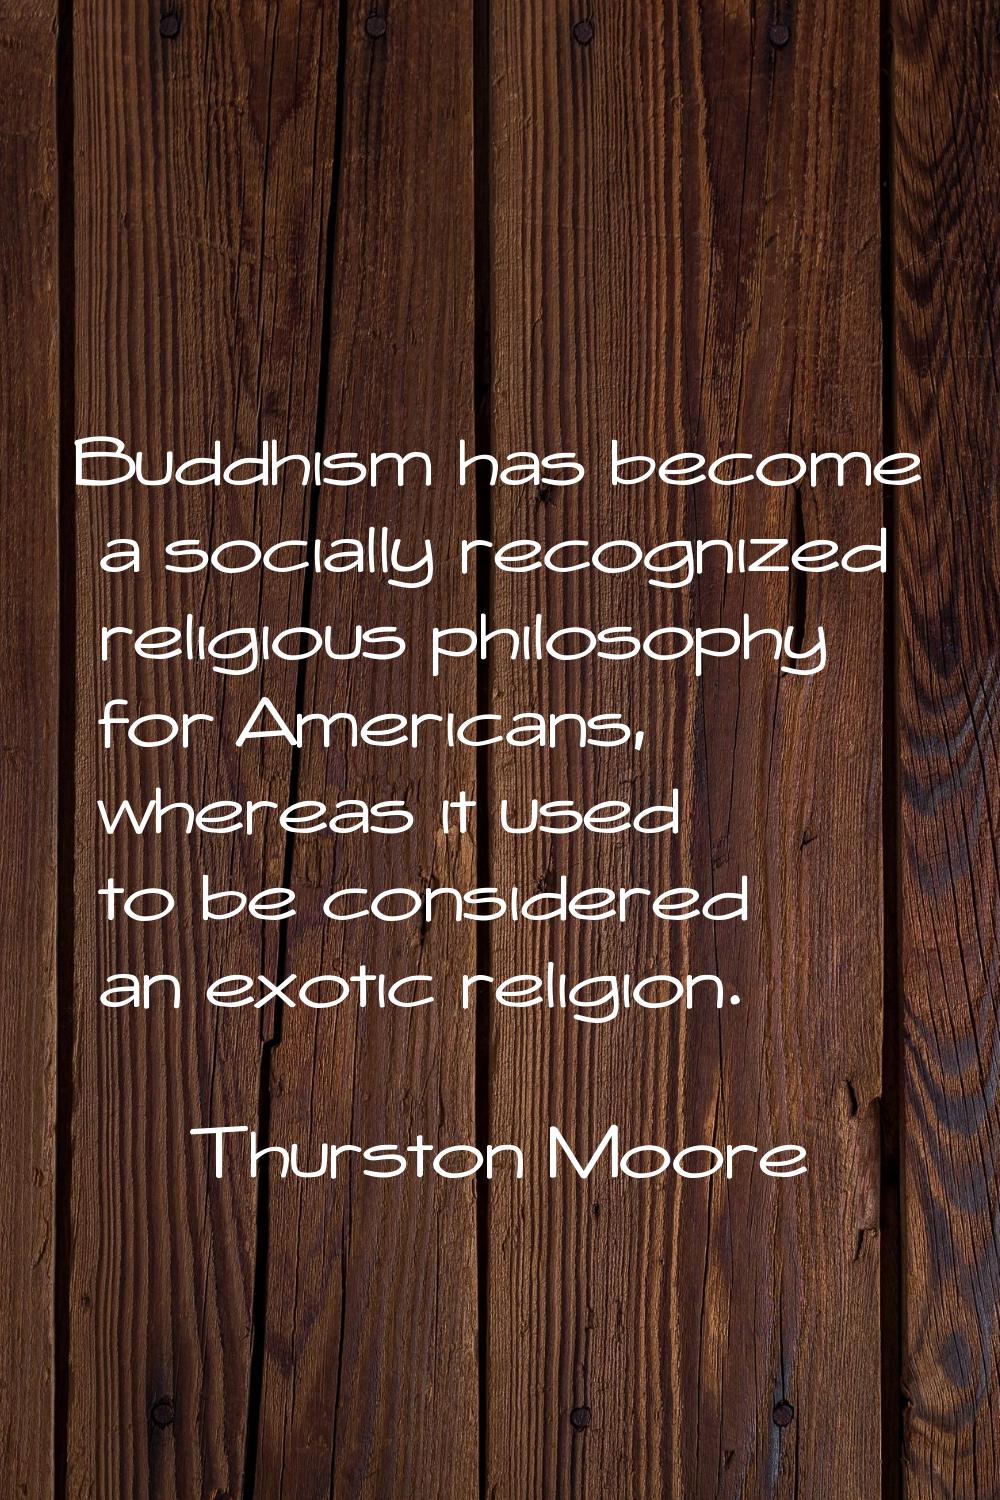 Buddhism has become a socially recognized religious philosophy for Americans, whereas it used to be